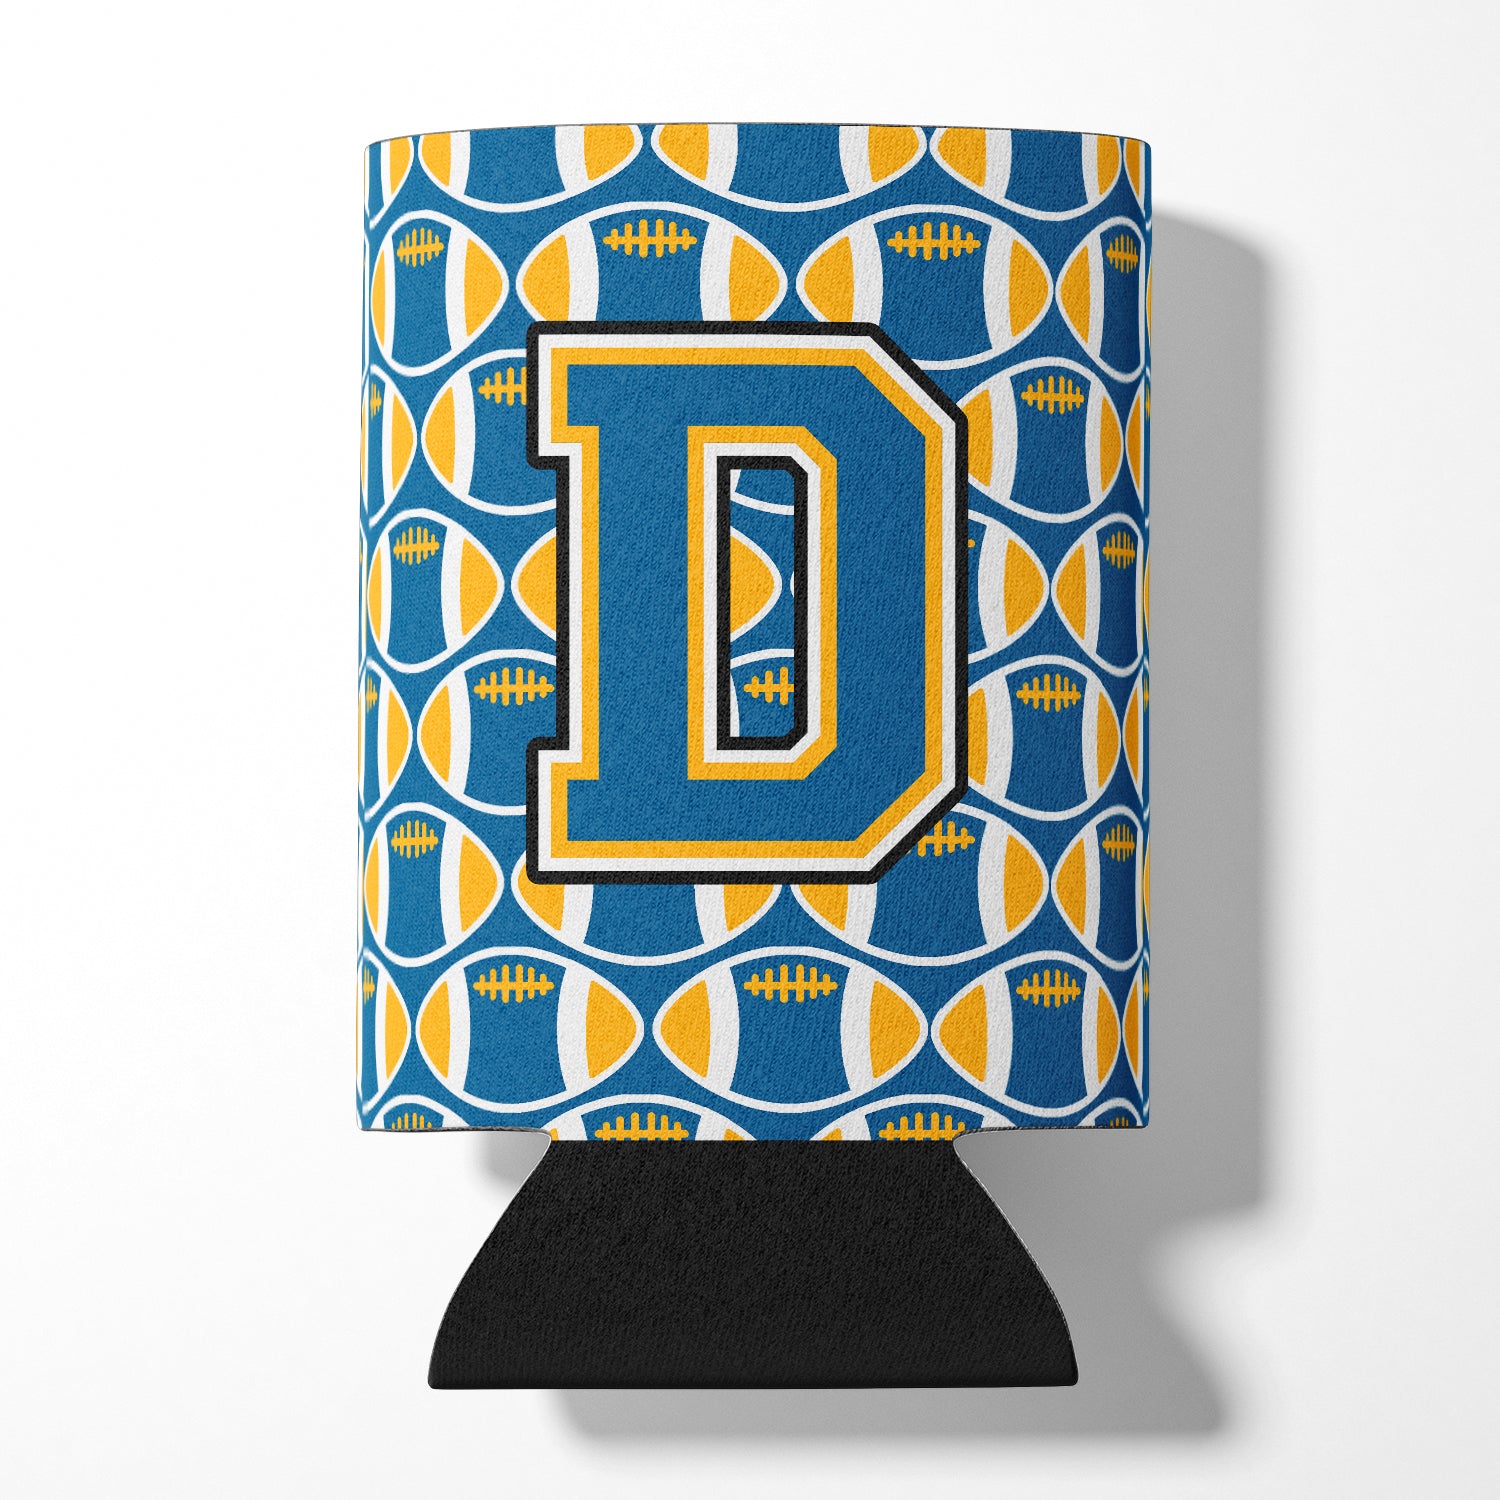 Letter D Football Blue and Gold Can or Bottle Hugger CJ1077-DCC